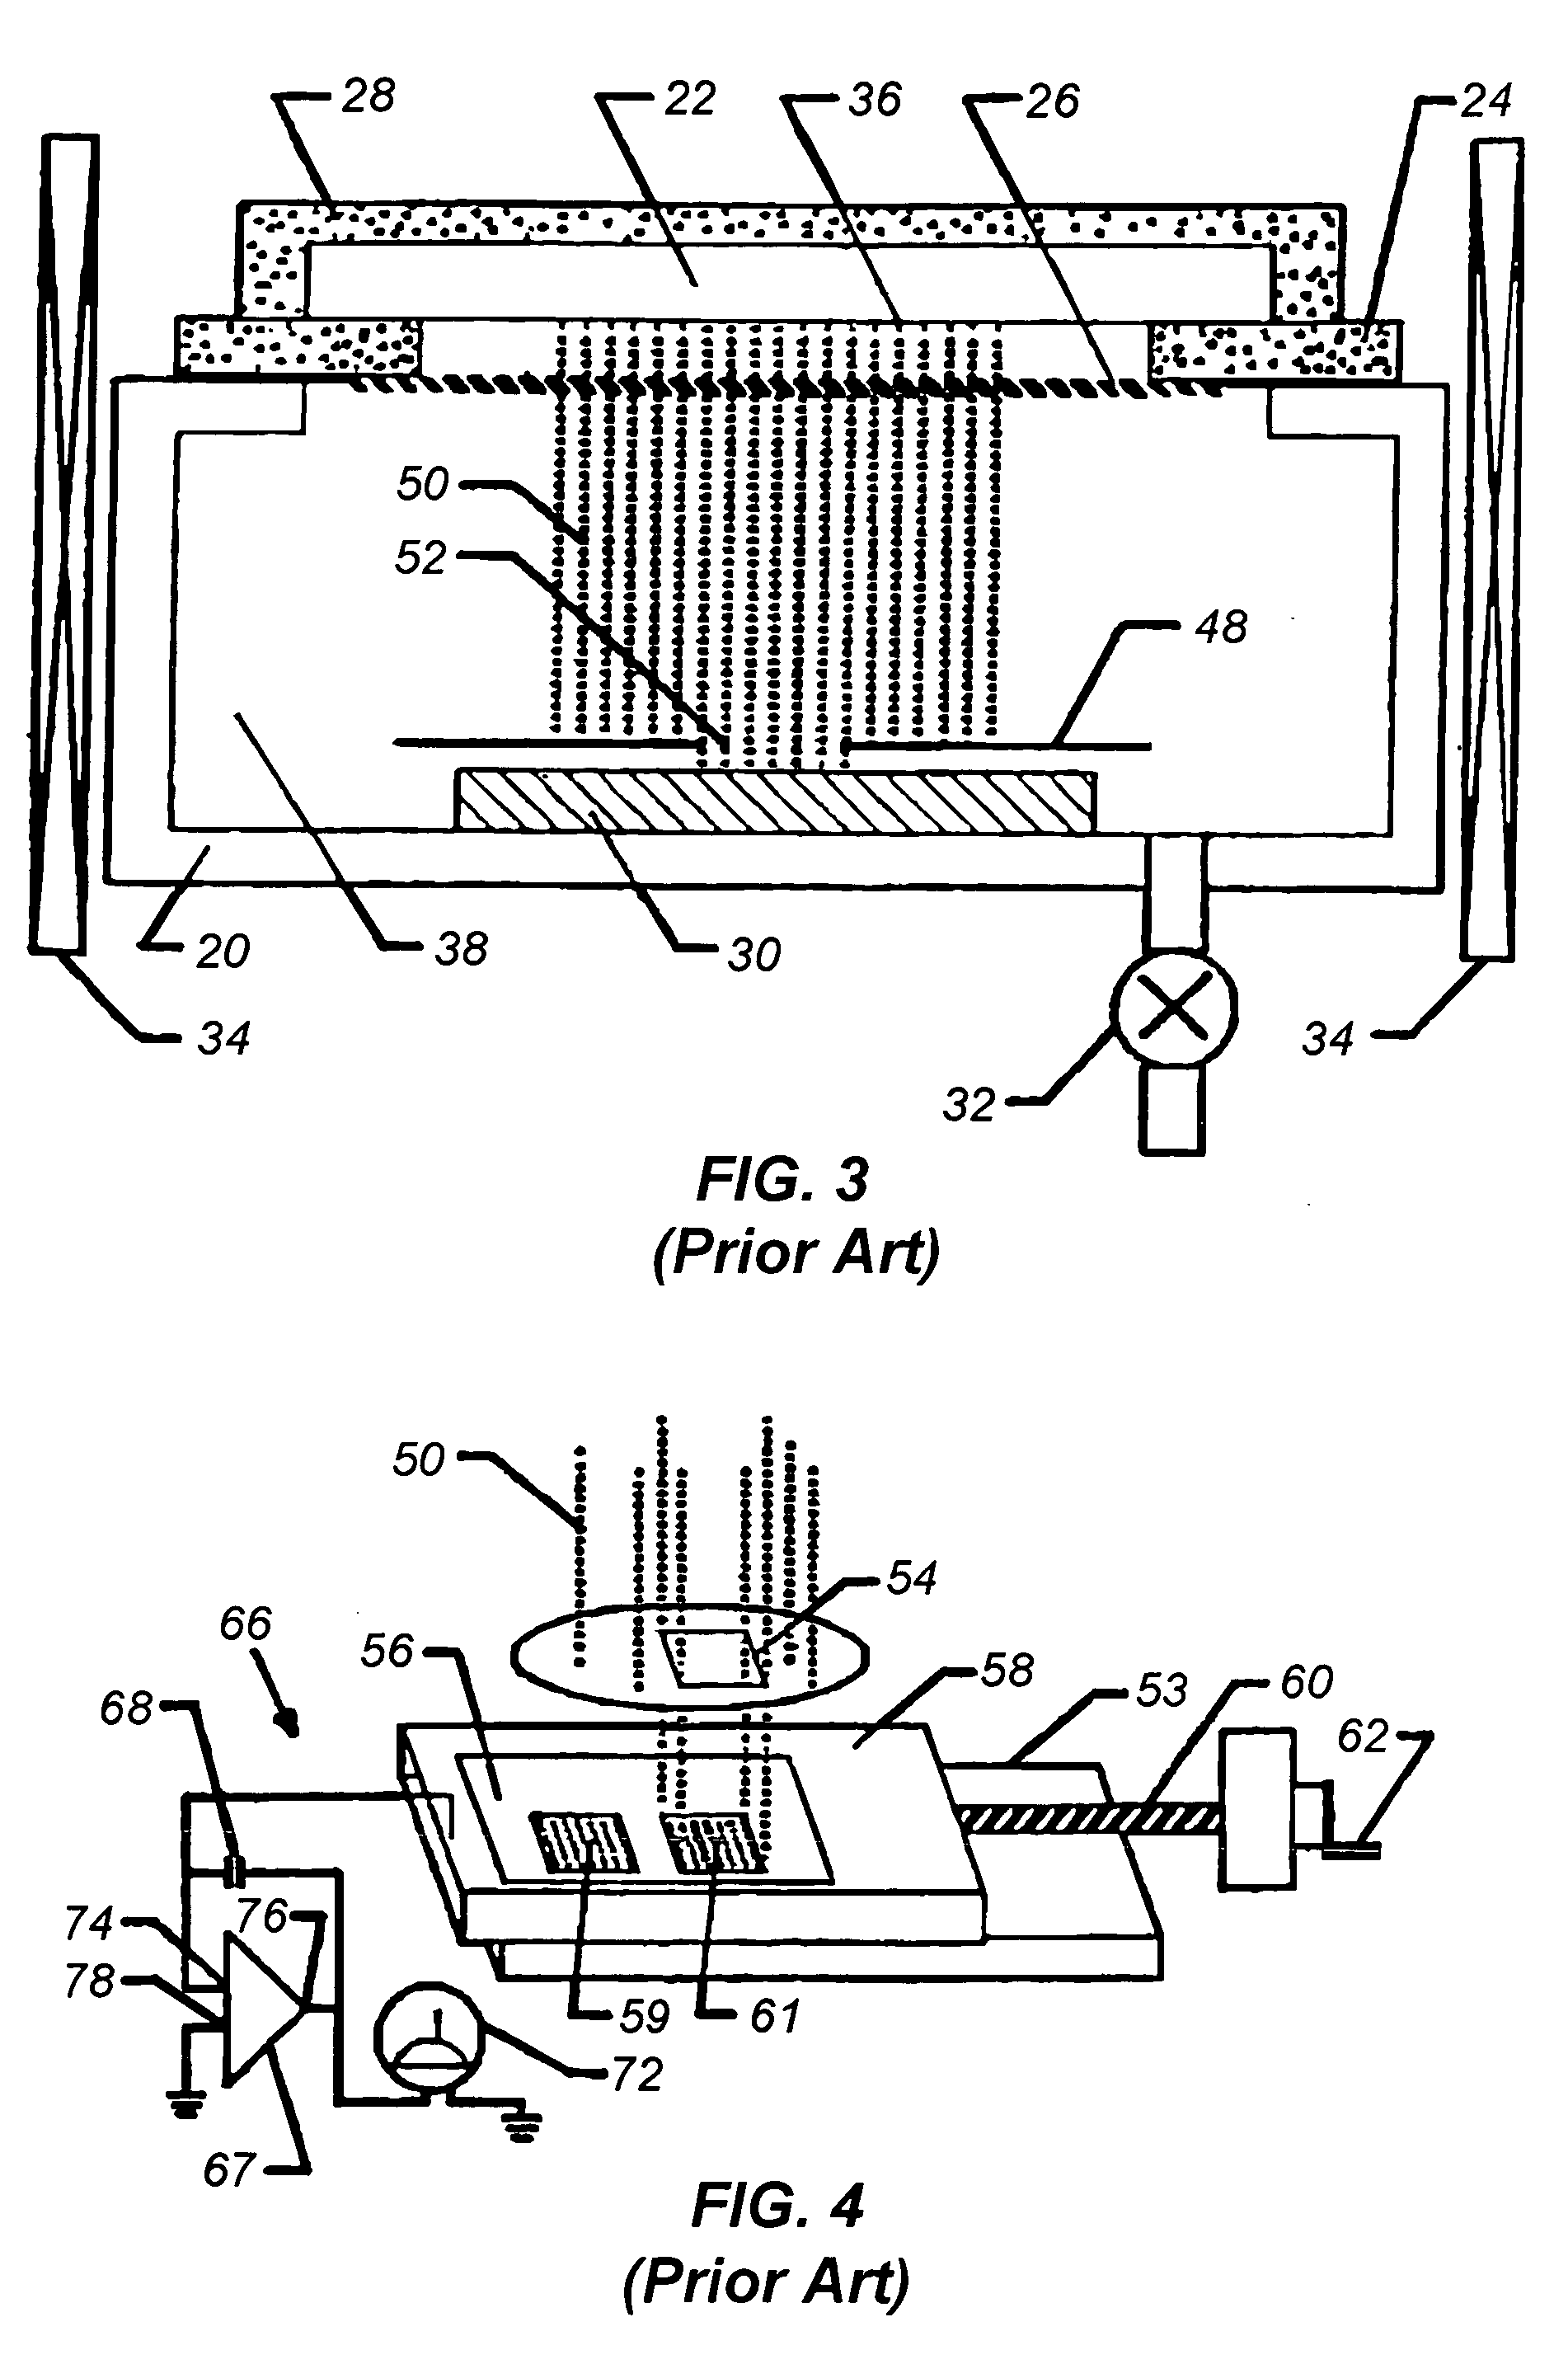 Method and apparatus for reducing charge density on a dielectric coated substrate after exposure to a large area electron beam